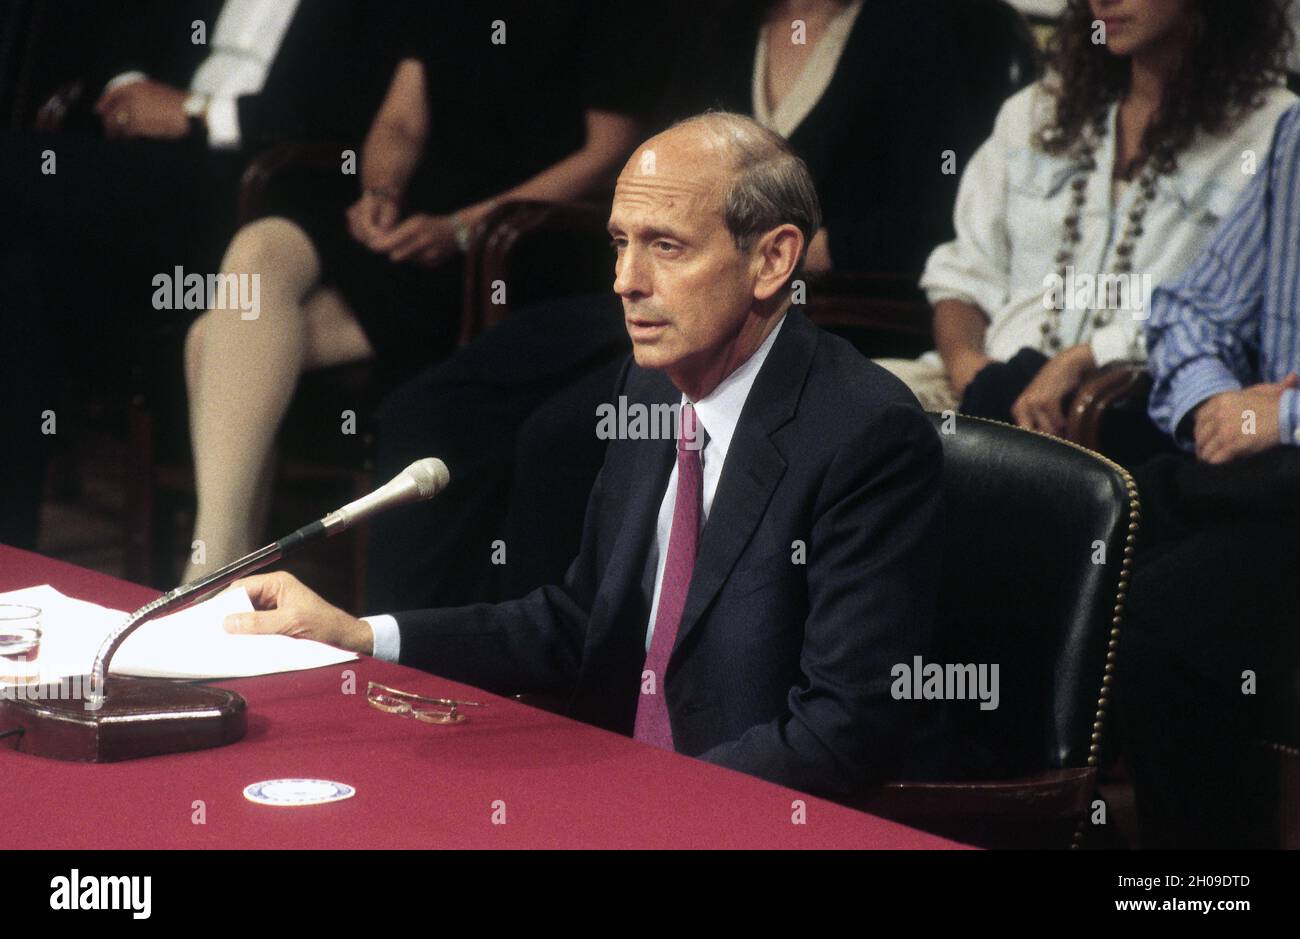 Chief Judge of the United States Court of Appeals for the First Circuit, Stephen G. Breyer, testifies before the US Senate Committee on the Judiciary on his nomination as Associate Justice of the US Supreme Court to replace the retiring Justice Harry Blackmun, on Capitol Hill in Washington, DC on July 12, 1994.Credit: Ron Sachs / CNP /MediaPunch Stock Photo